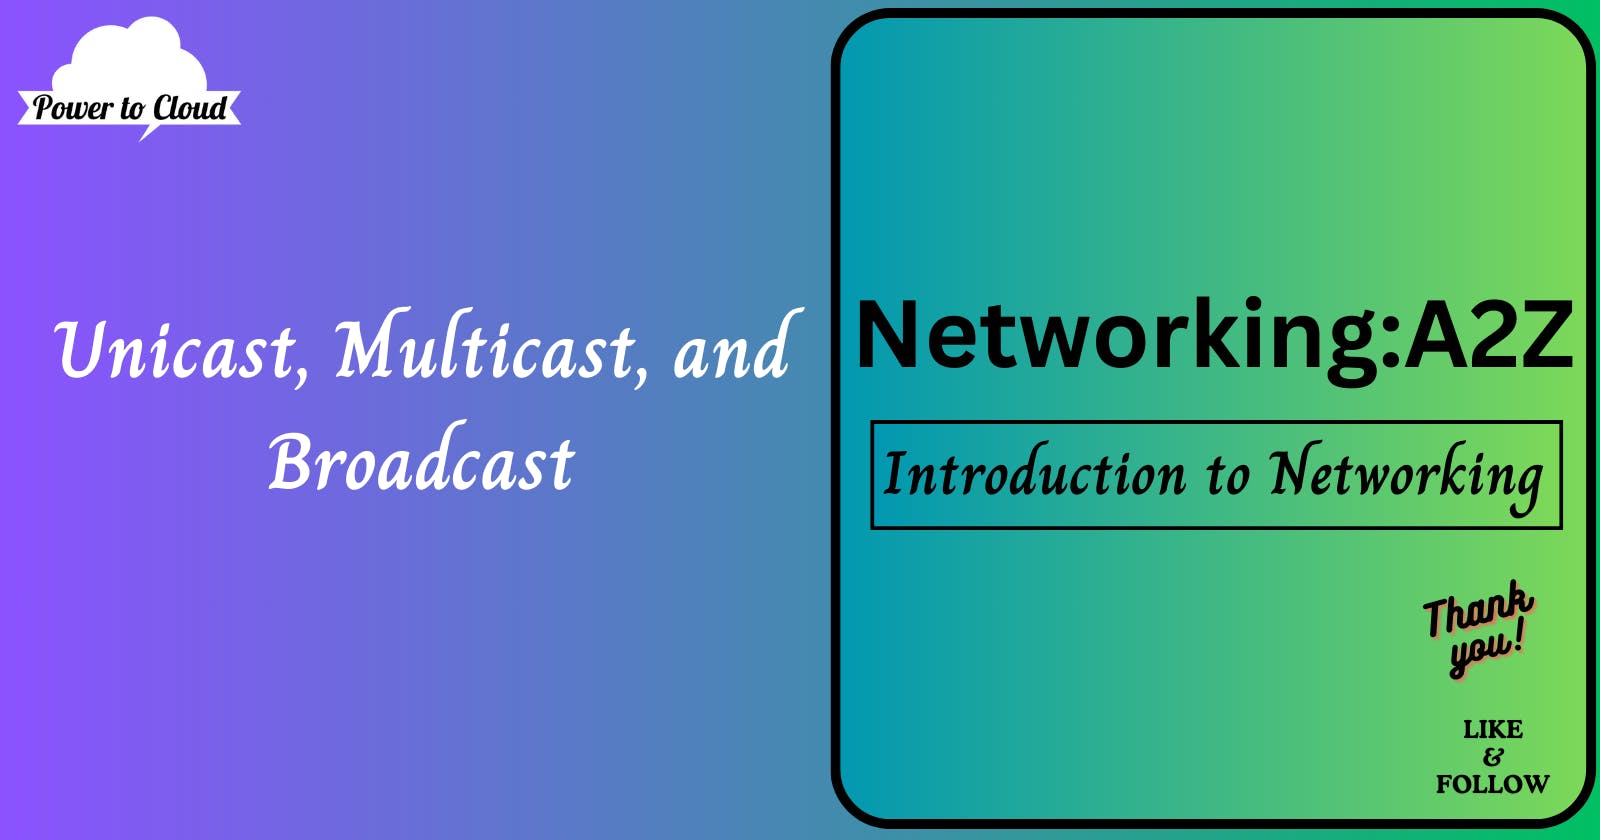 1.7 Unicast, Multicast, and Broadcast